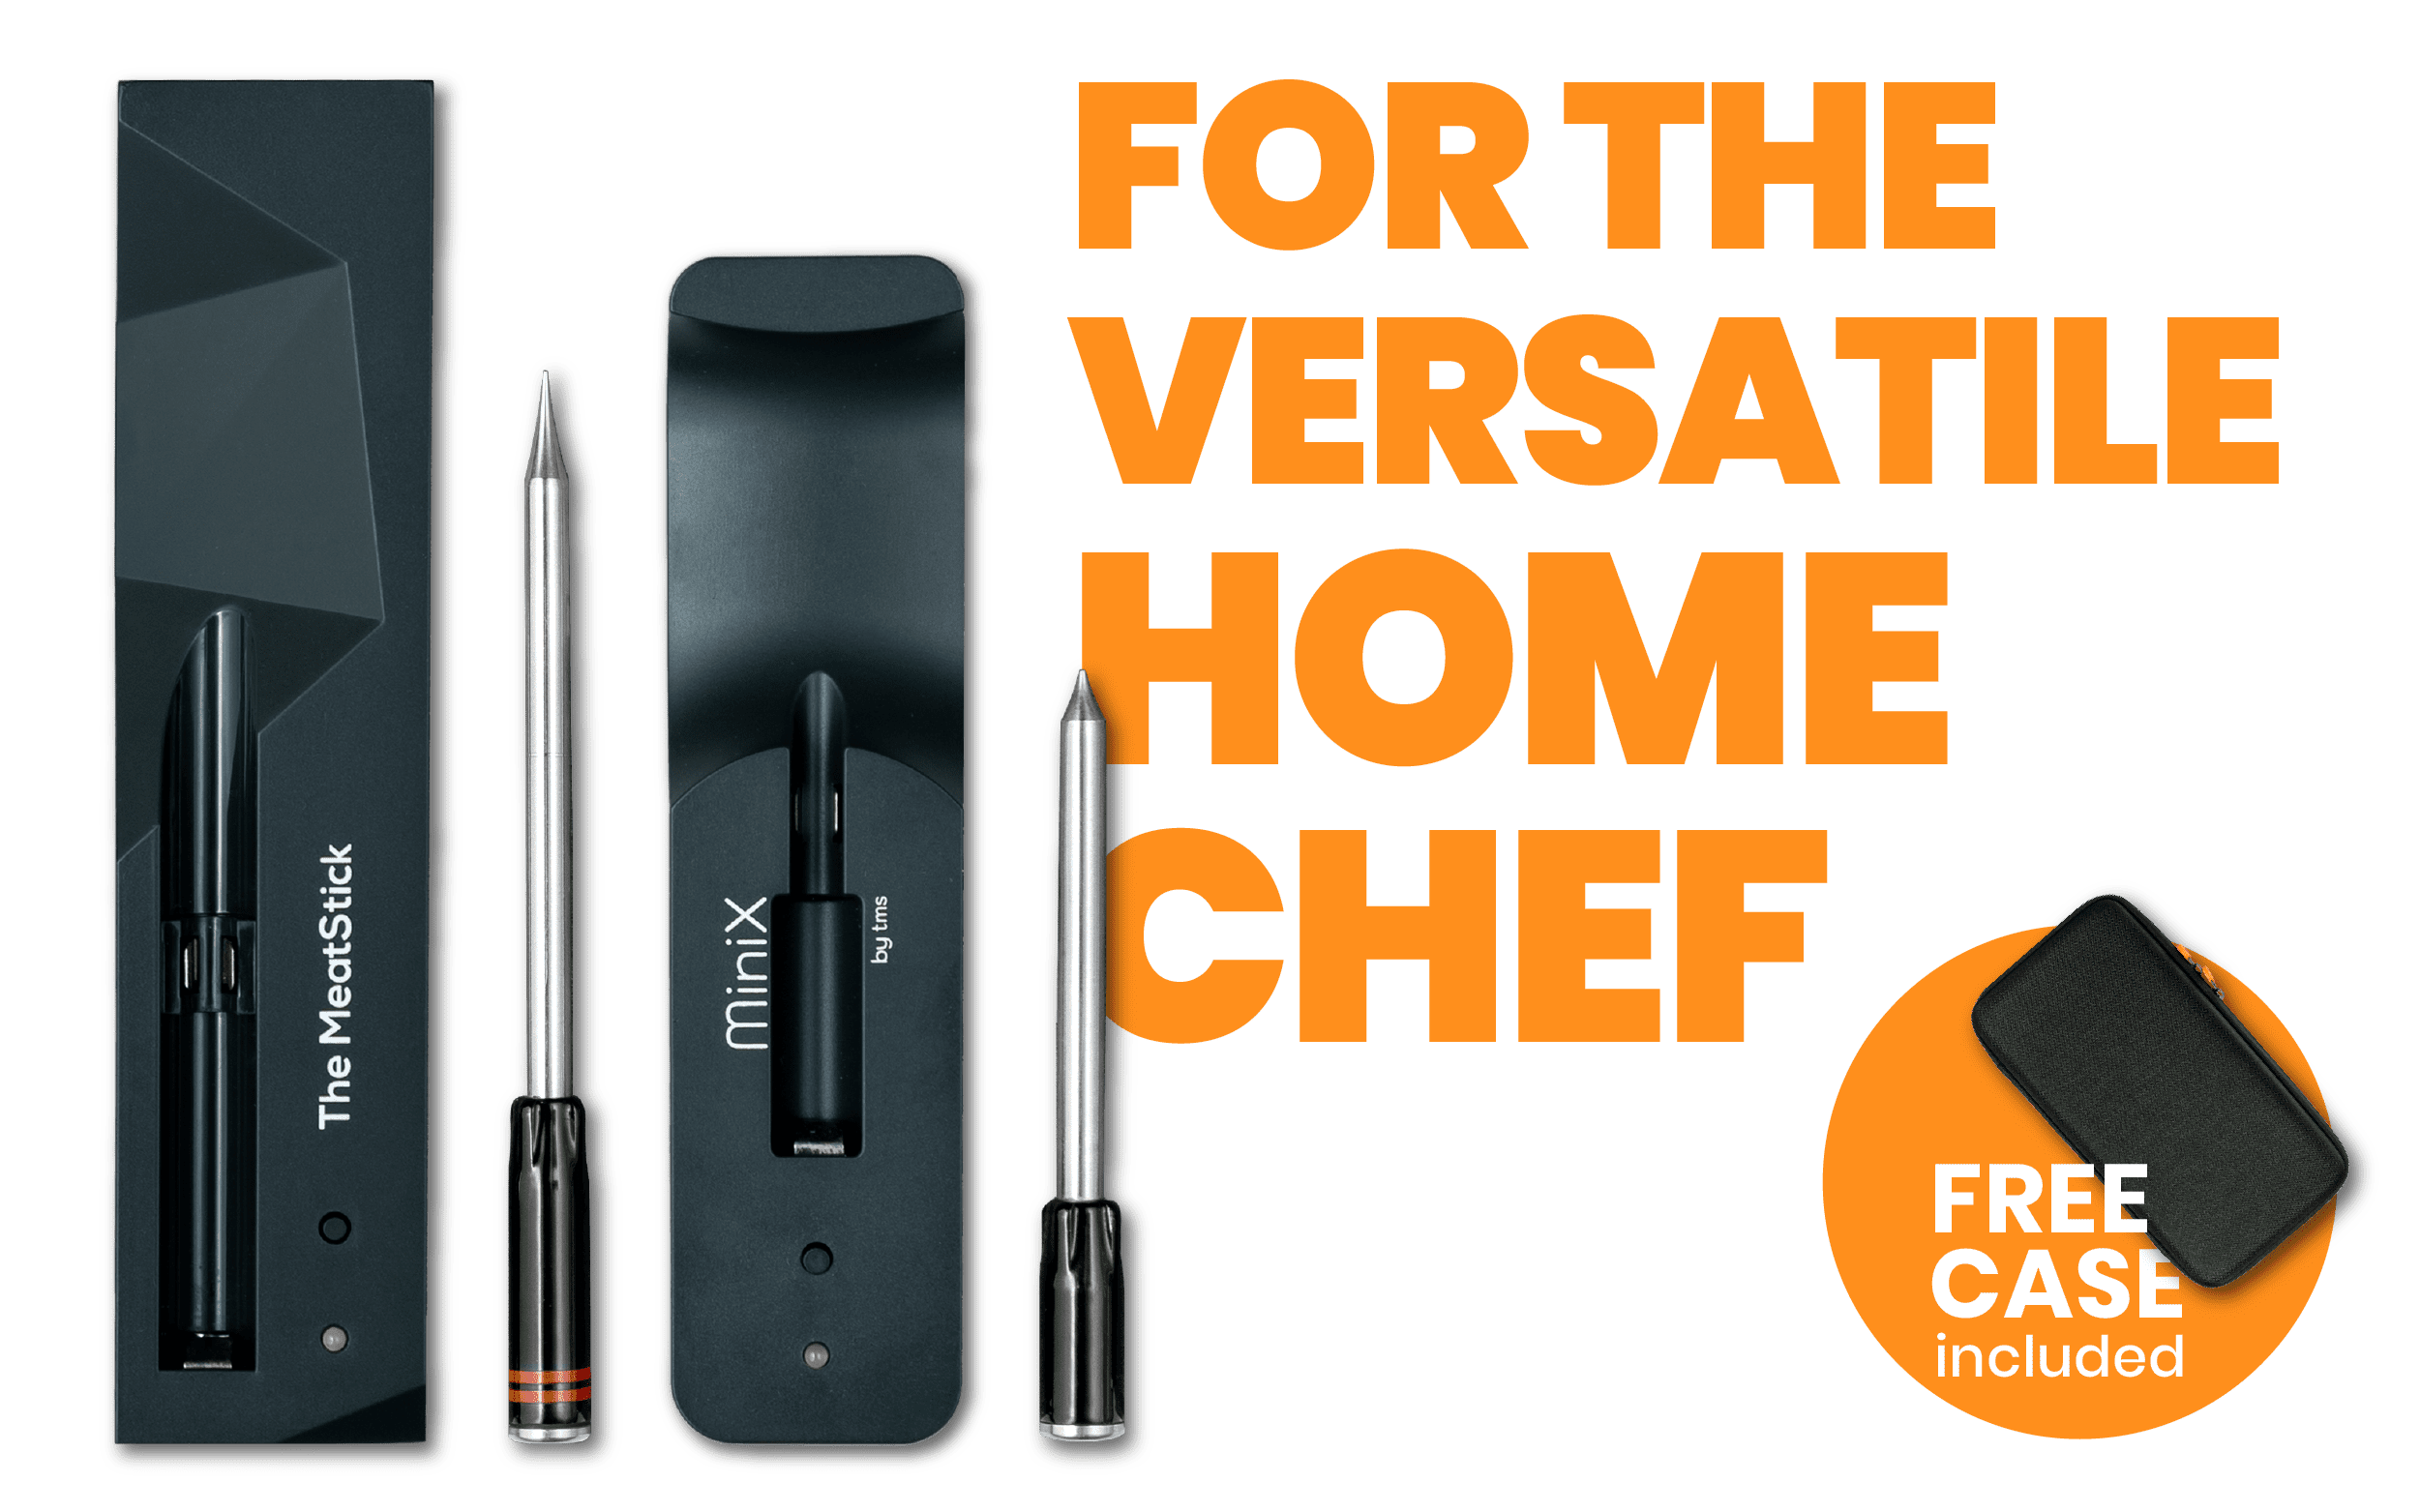 MeatStick BBQ & Kitchen Set for the Versatile Home Chef